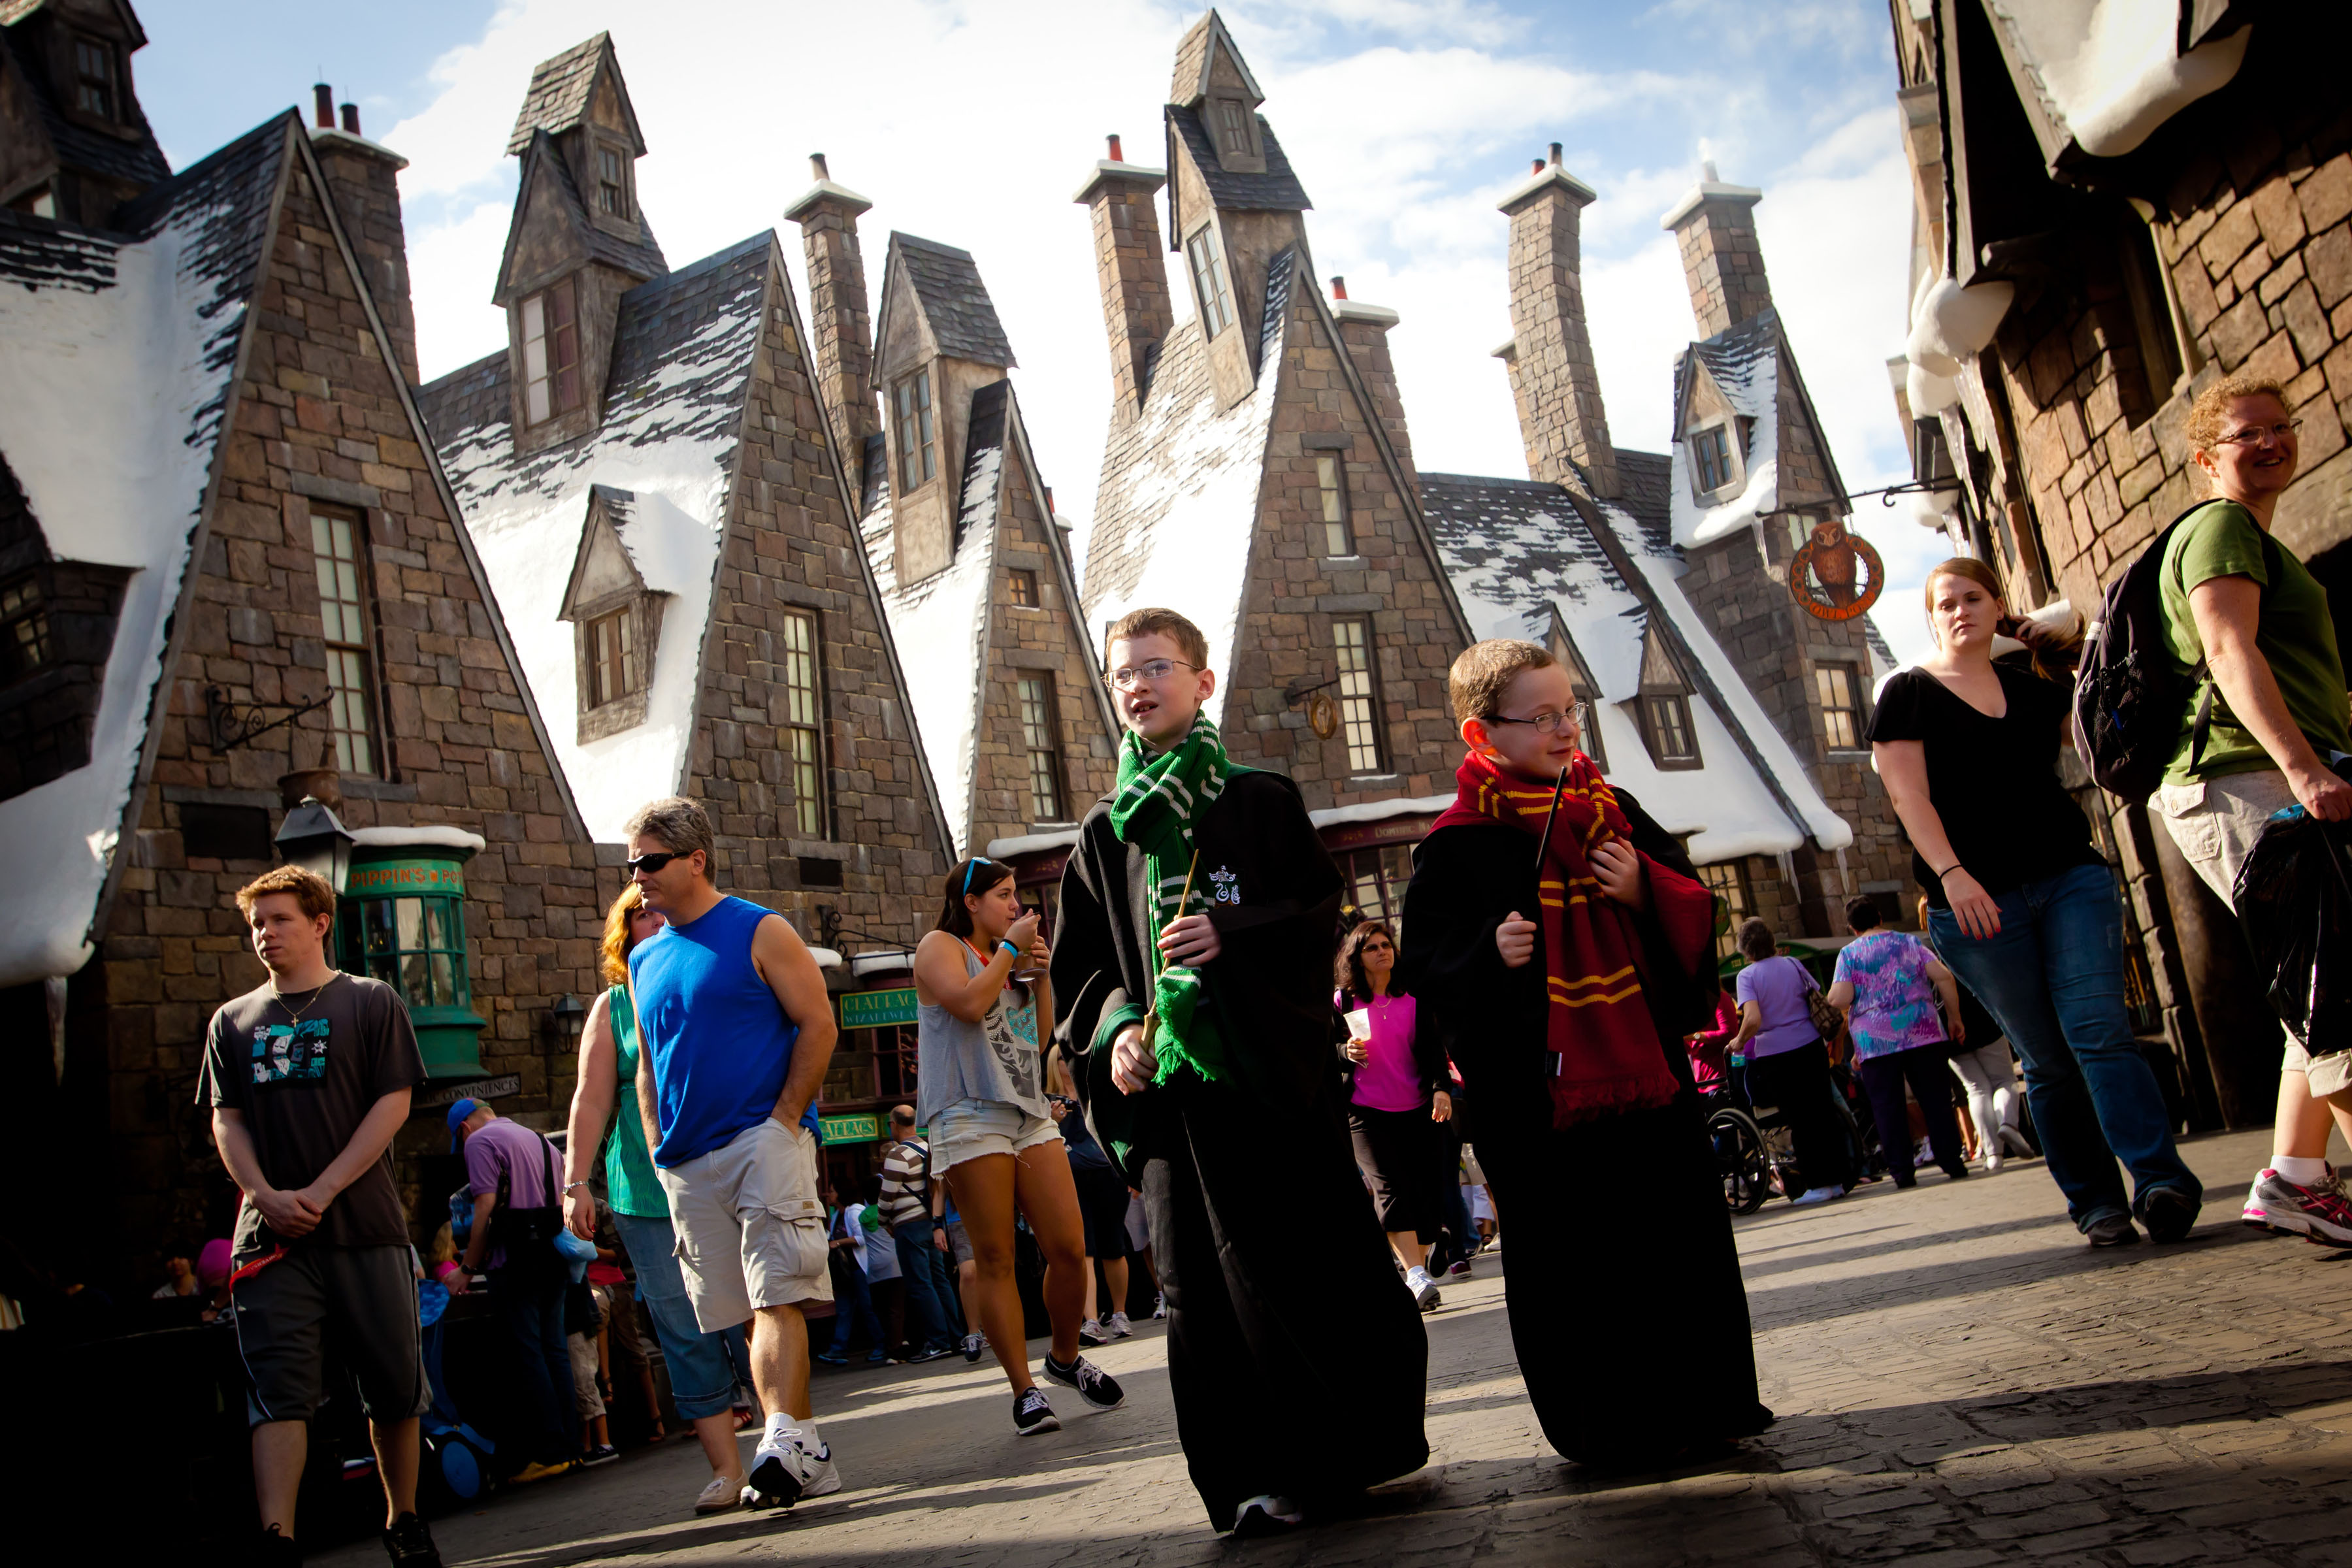 Universal Studios Orlando Relaunches Popular The Wizarding World of Harry Potter Vacation Package now with all-new Enhancements